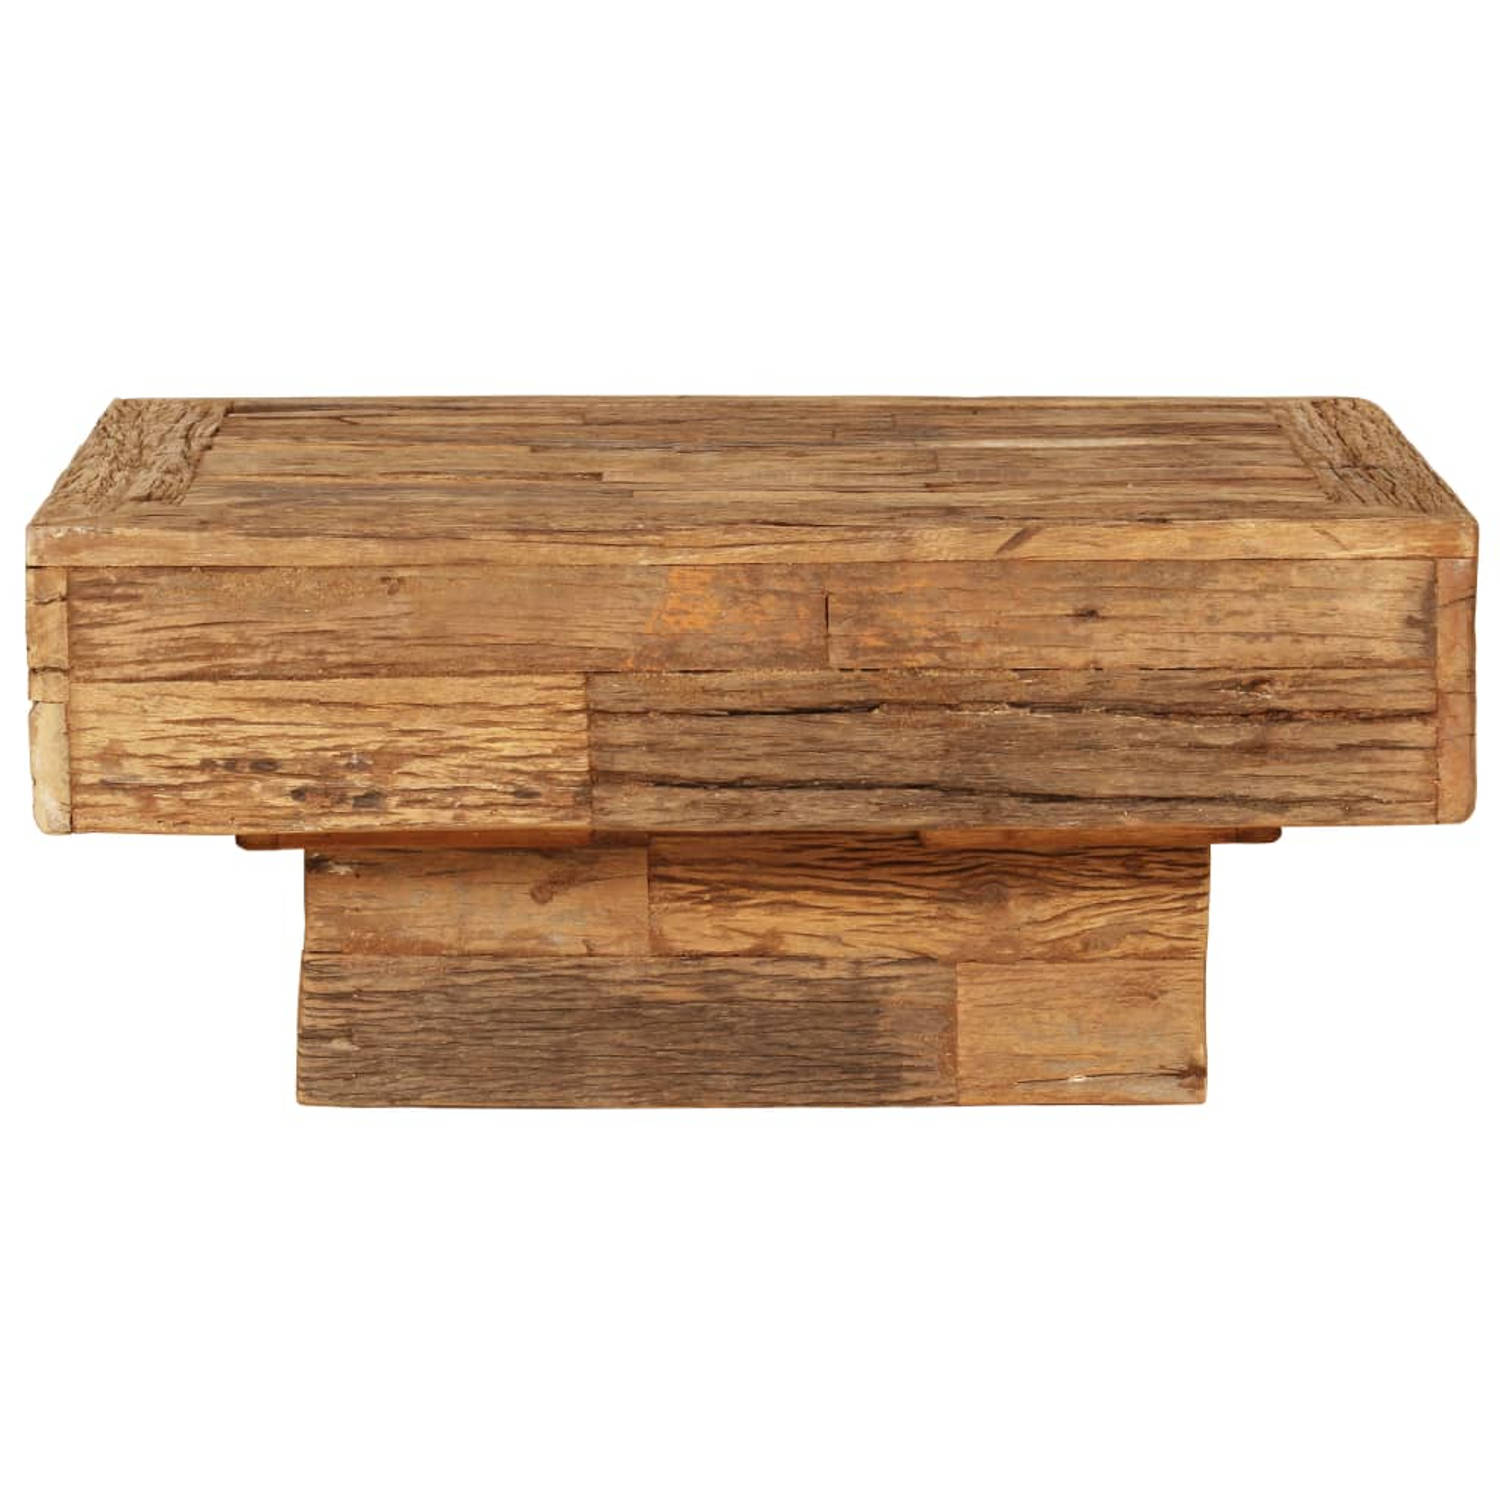 The Living Store Salontafel Vintage Stijl - 70 x 70 x 30 cm - Massief Recycled Hout